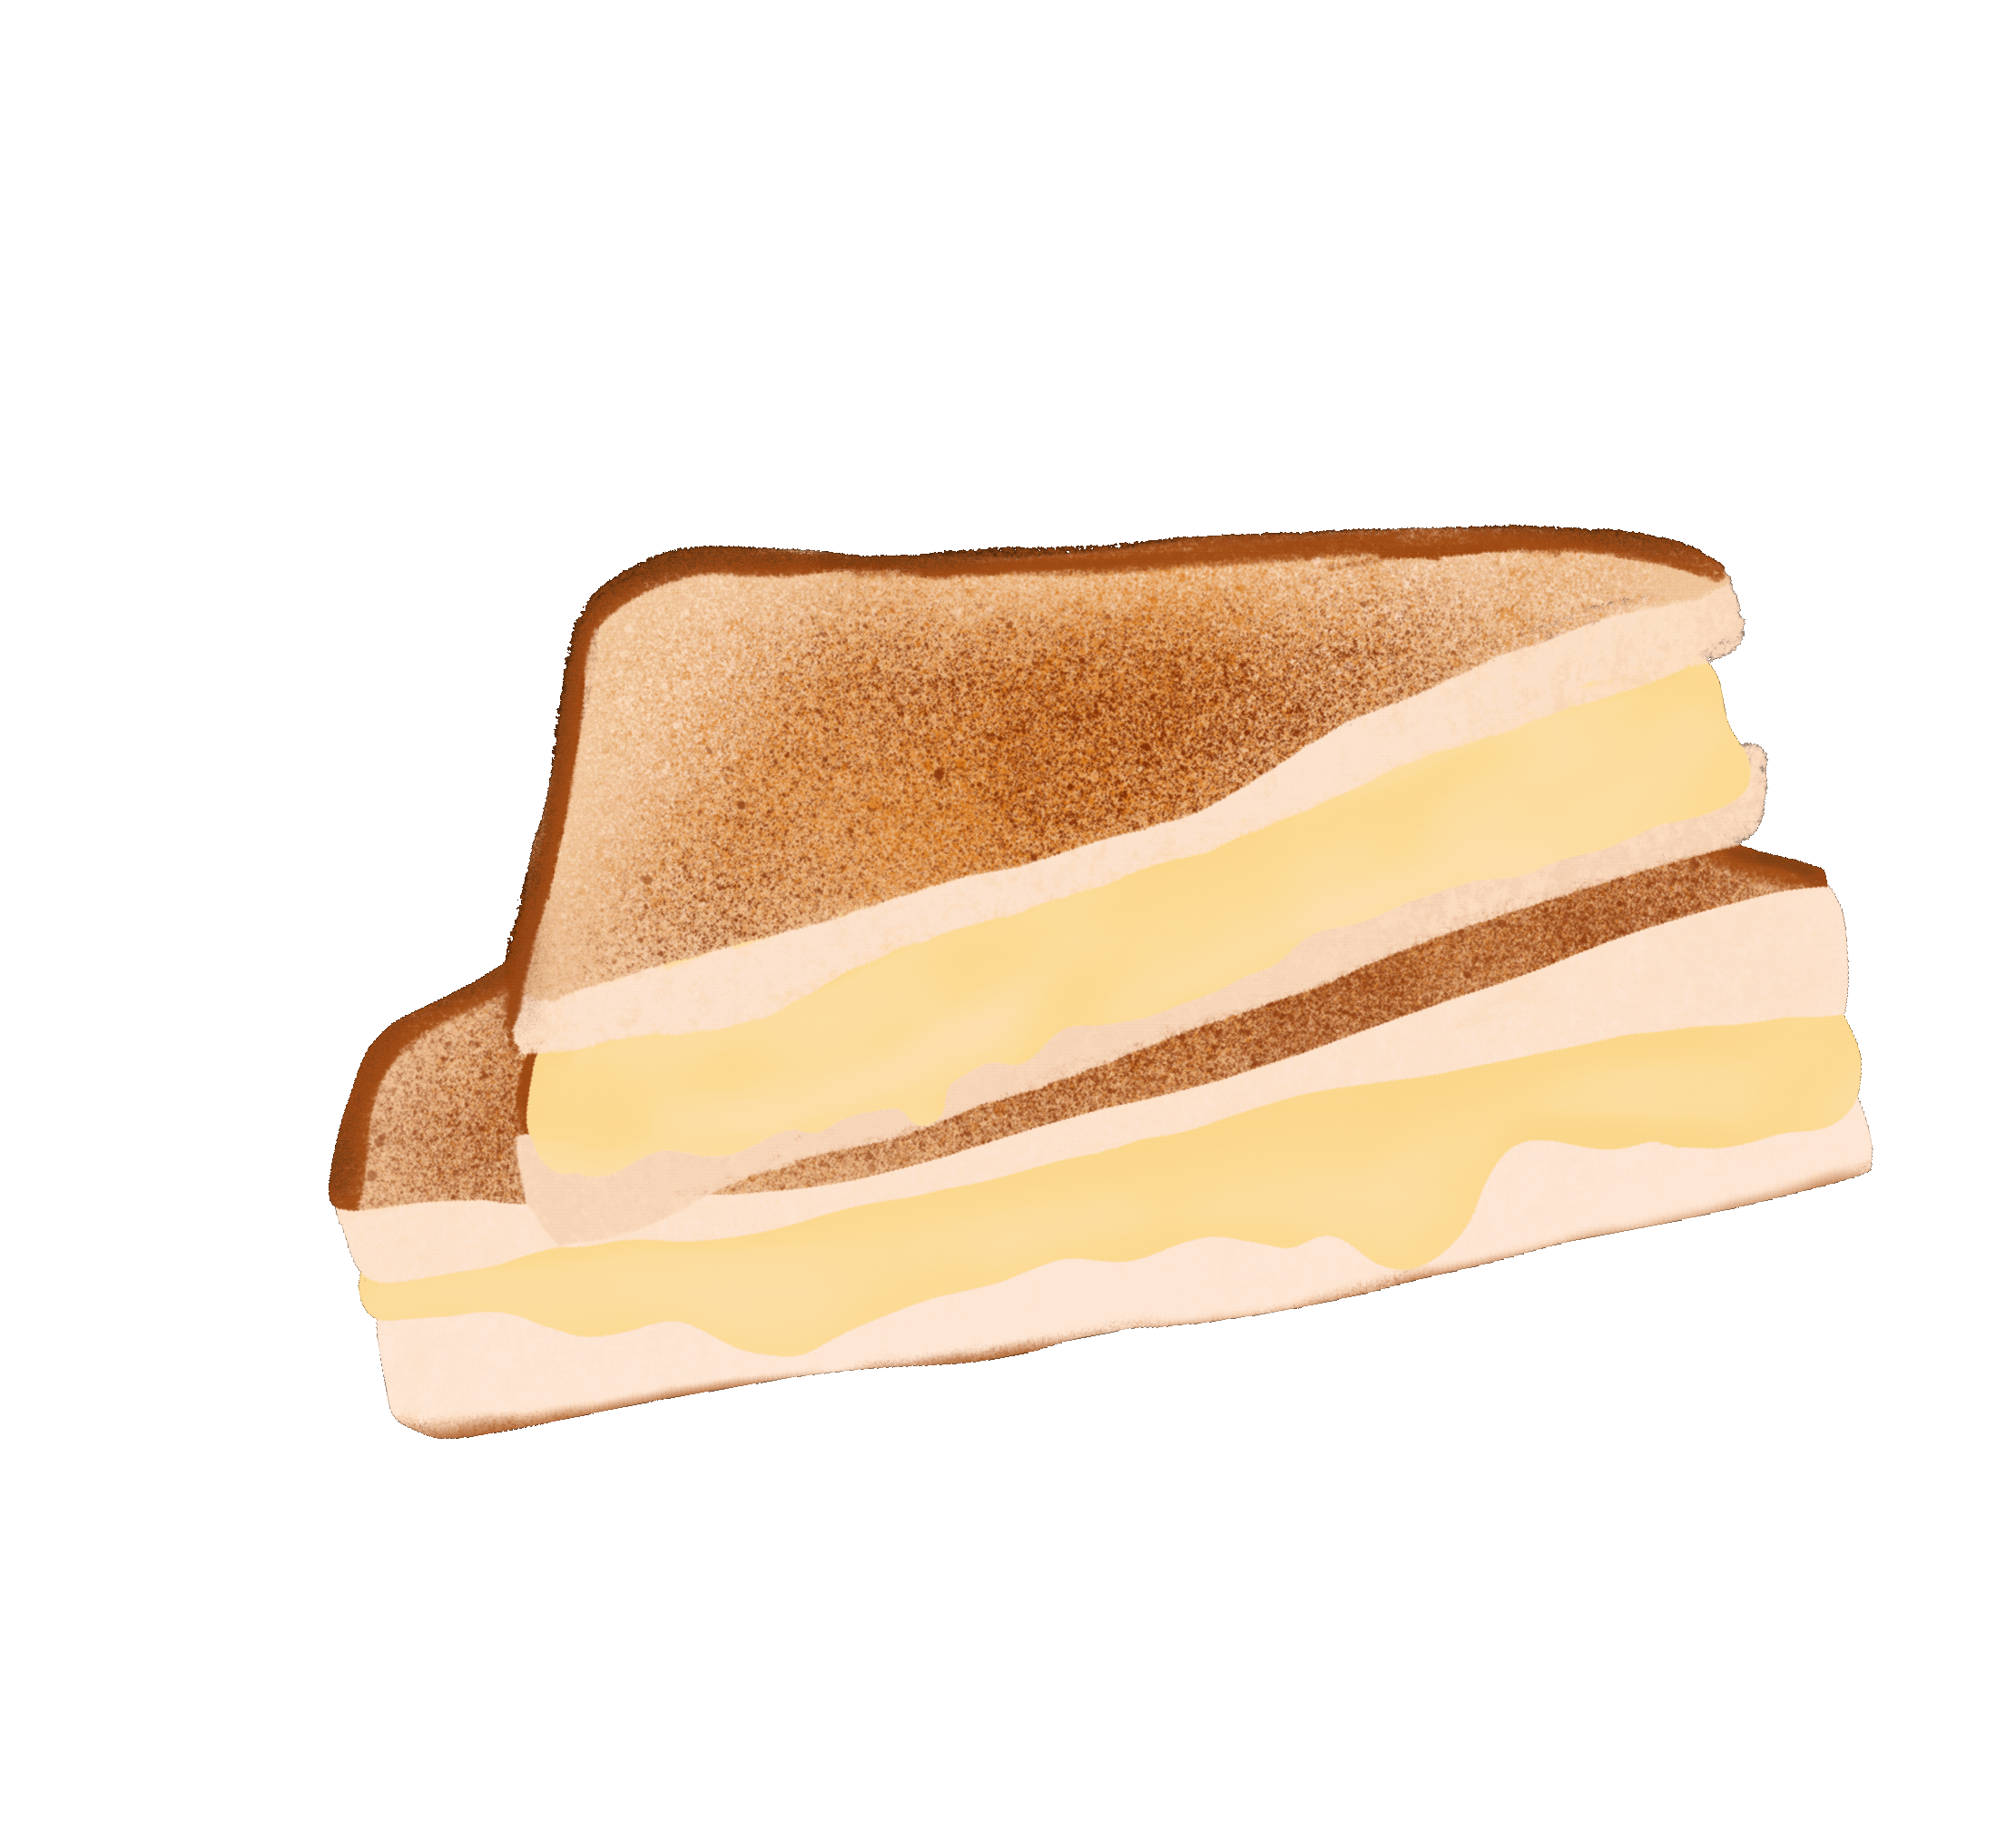 Grilled cheese.gif